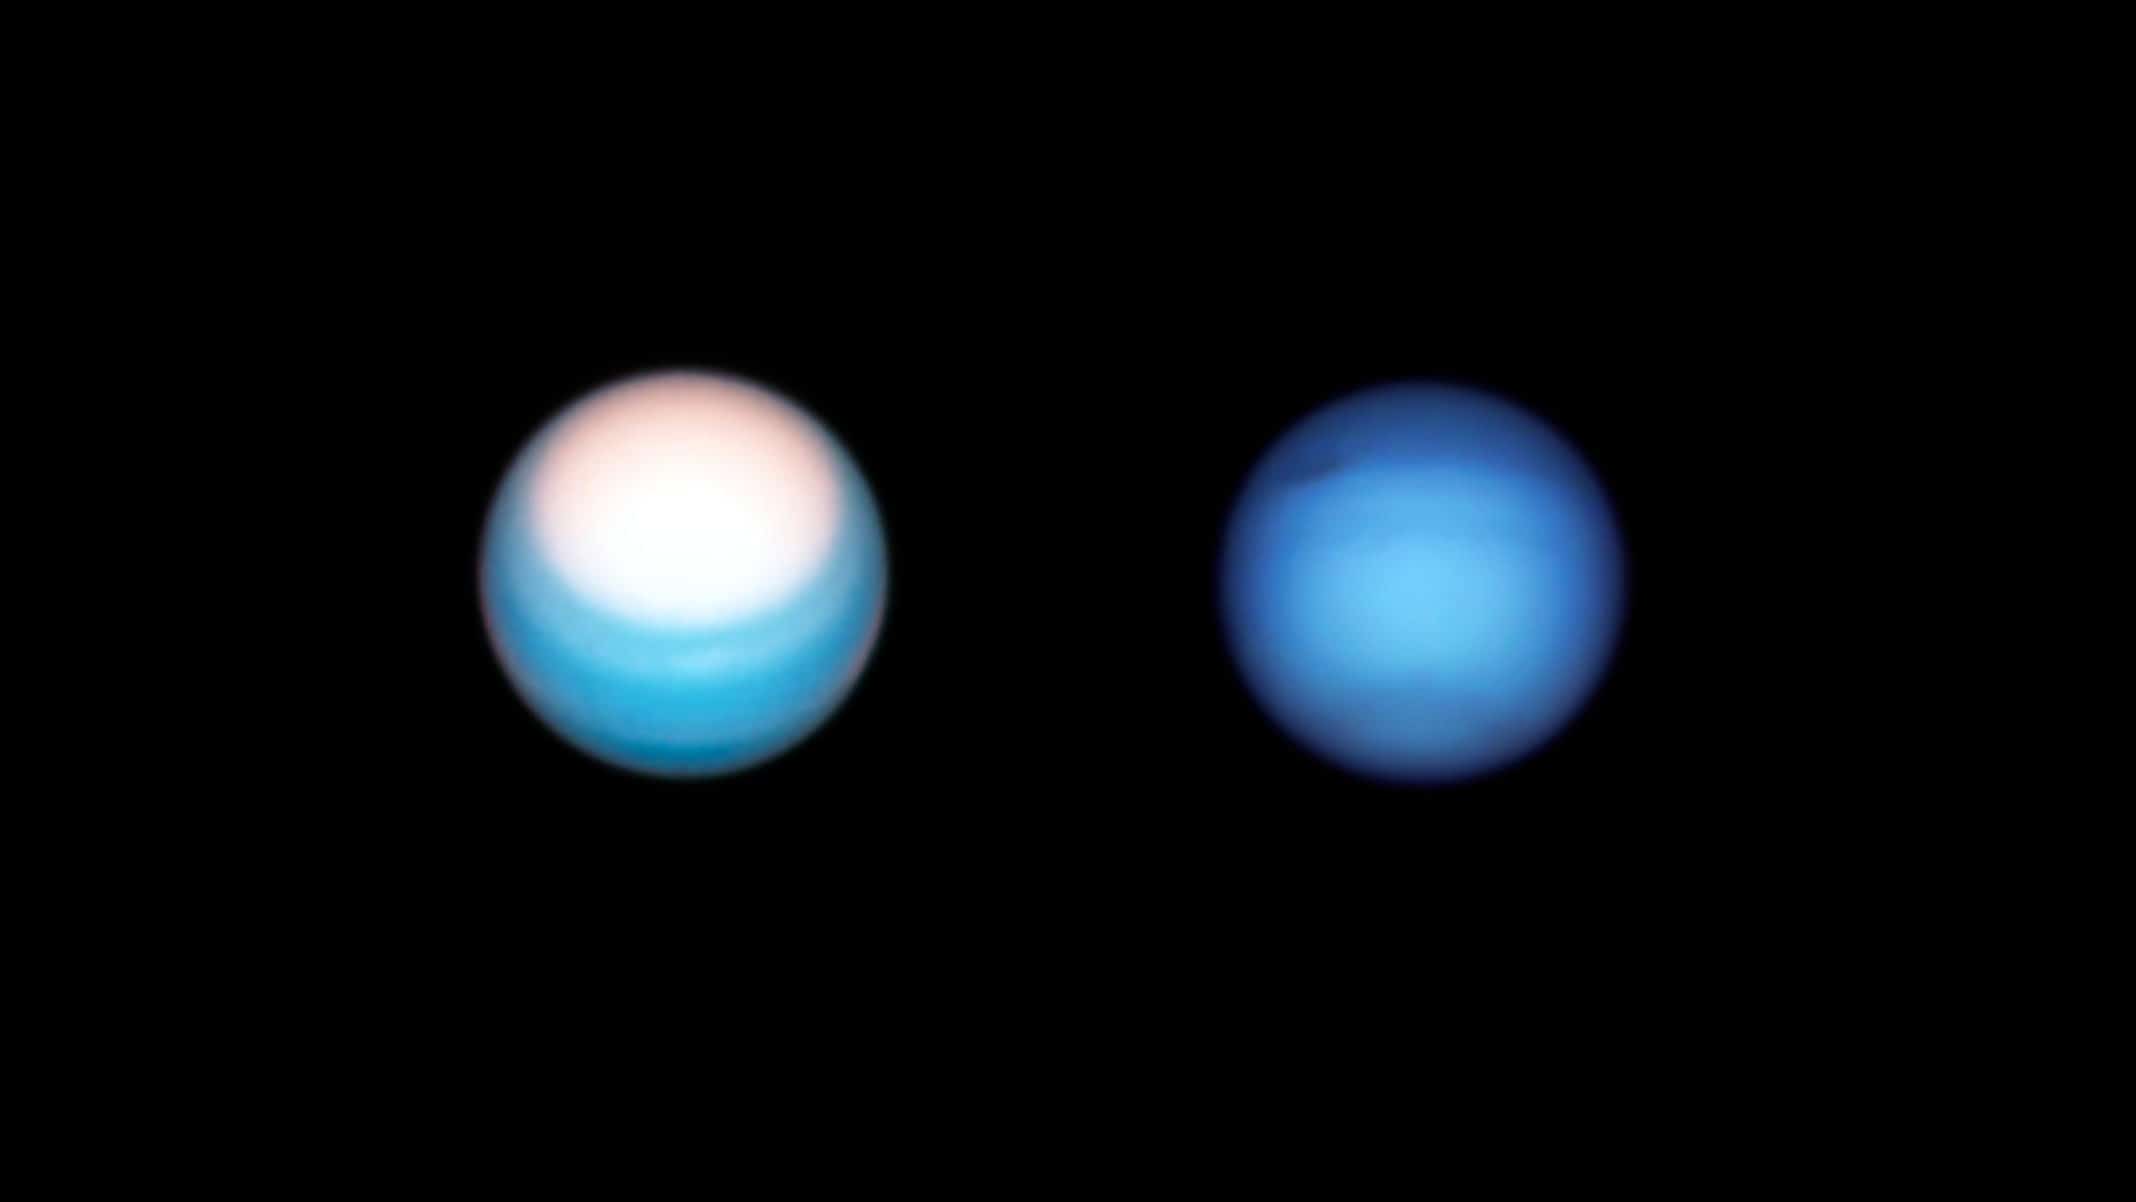 Hubble’s Observations of Uranus and Neptune in 2021